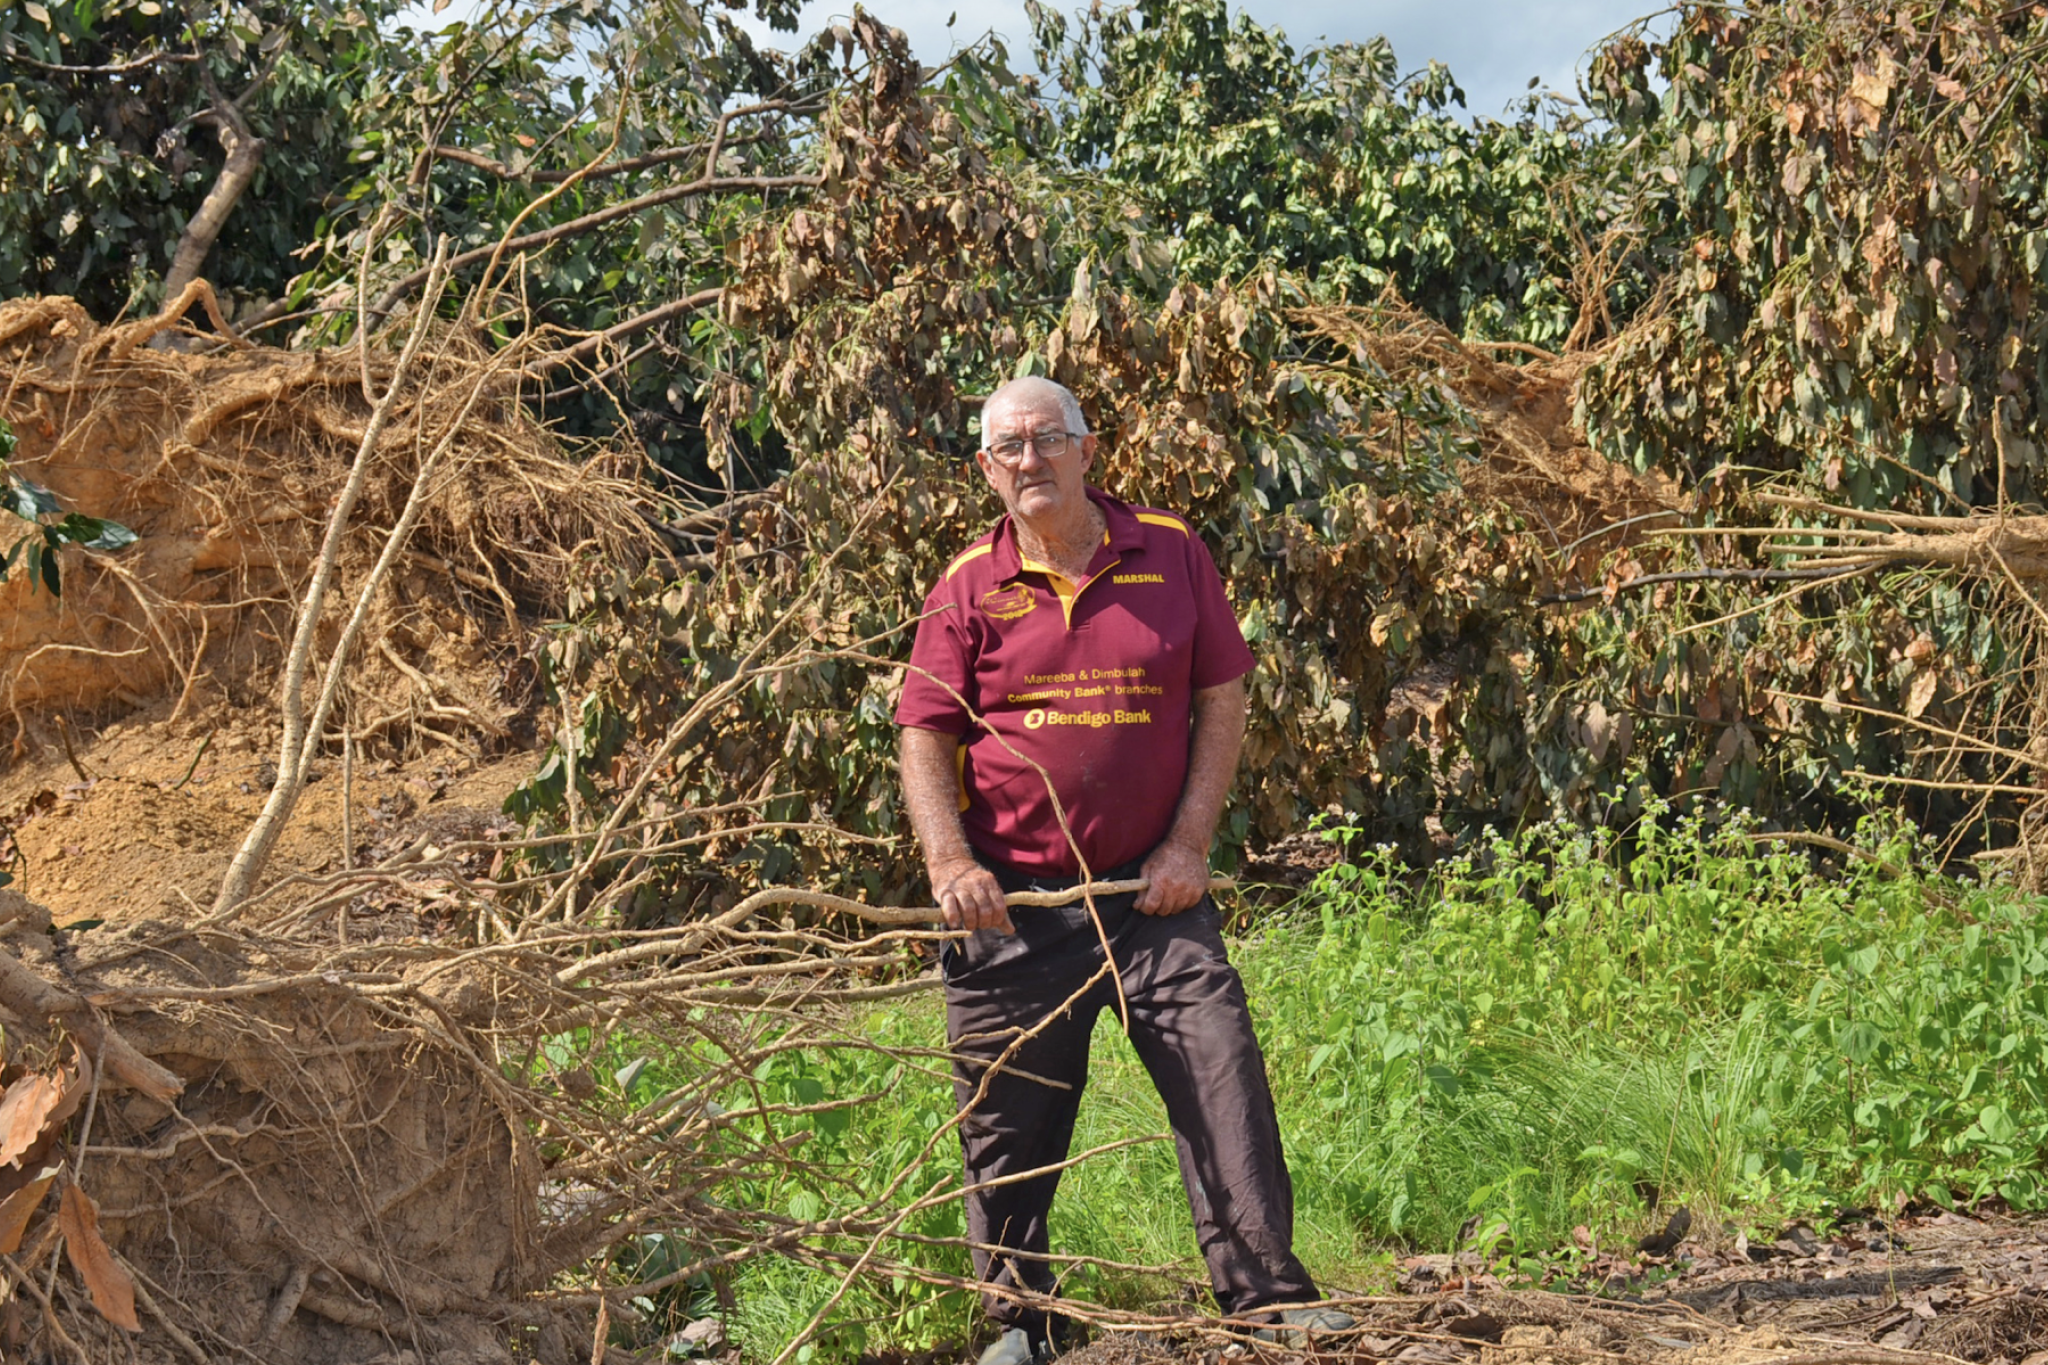 Mareeba farmer Ron Blundell with some of the mature avocado trees on his property being bulldozed.